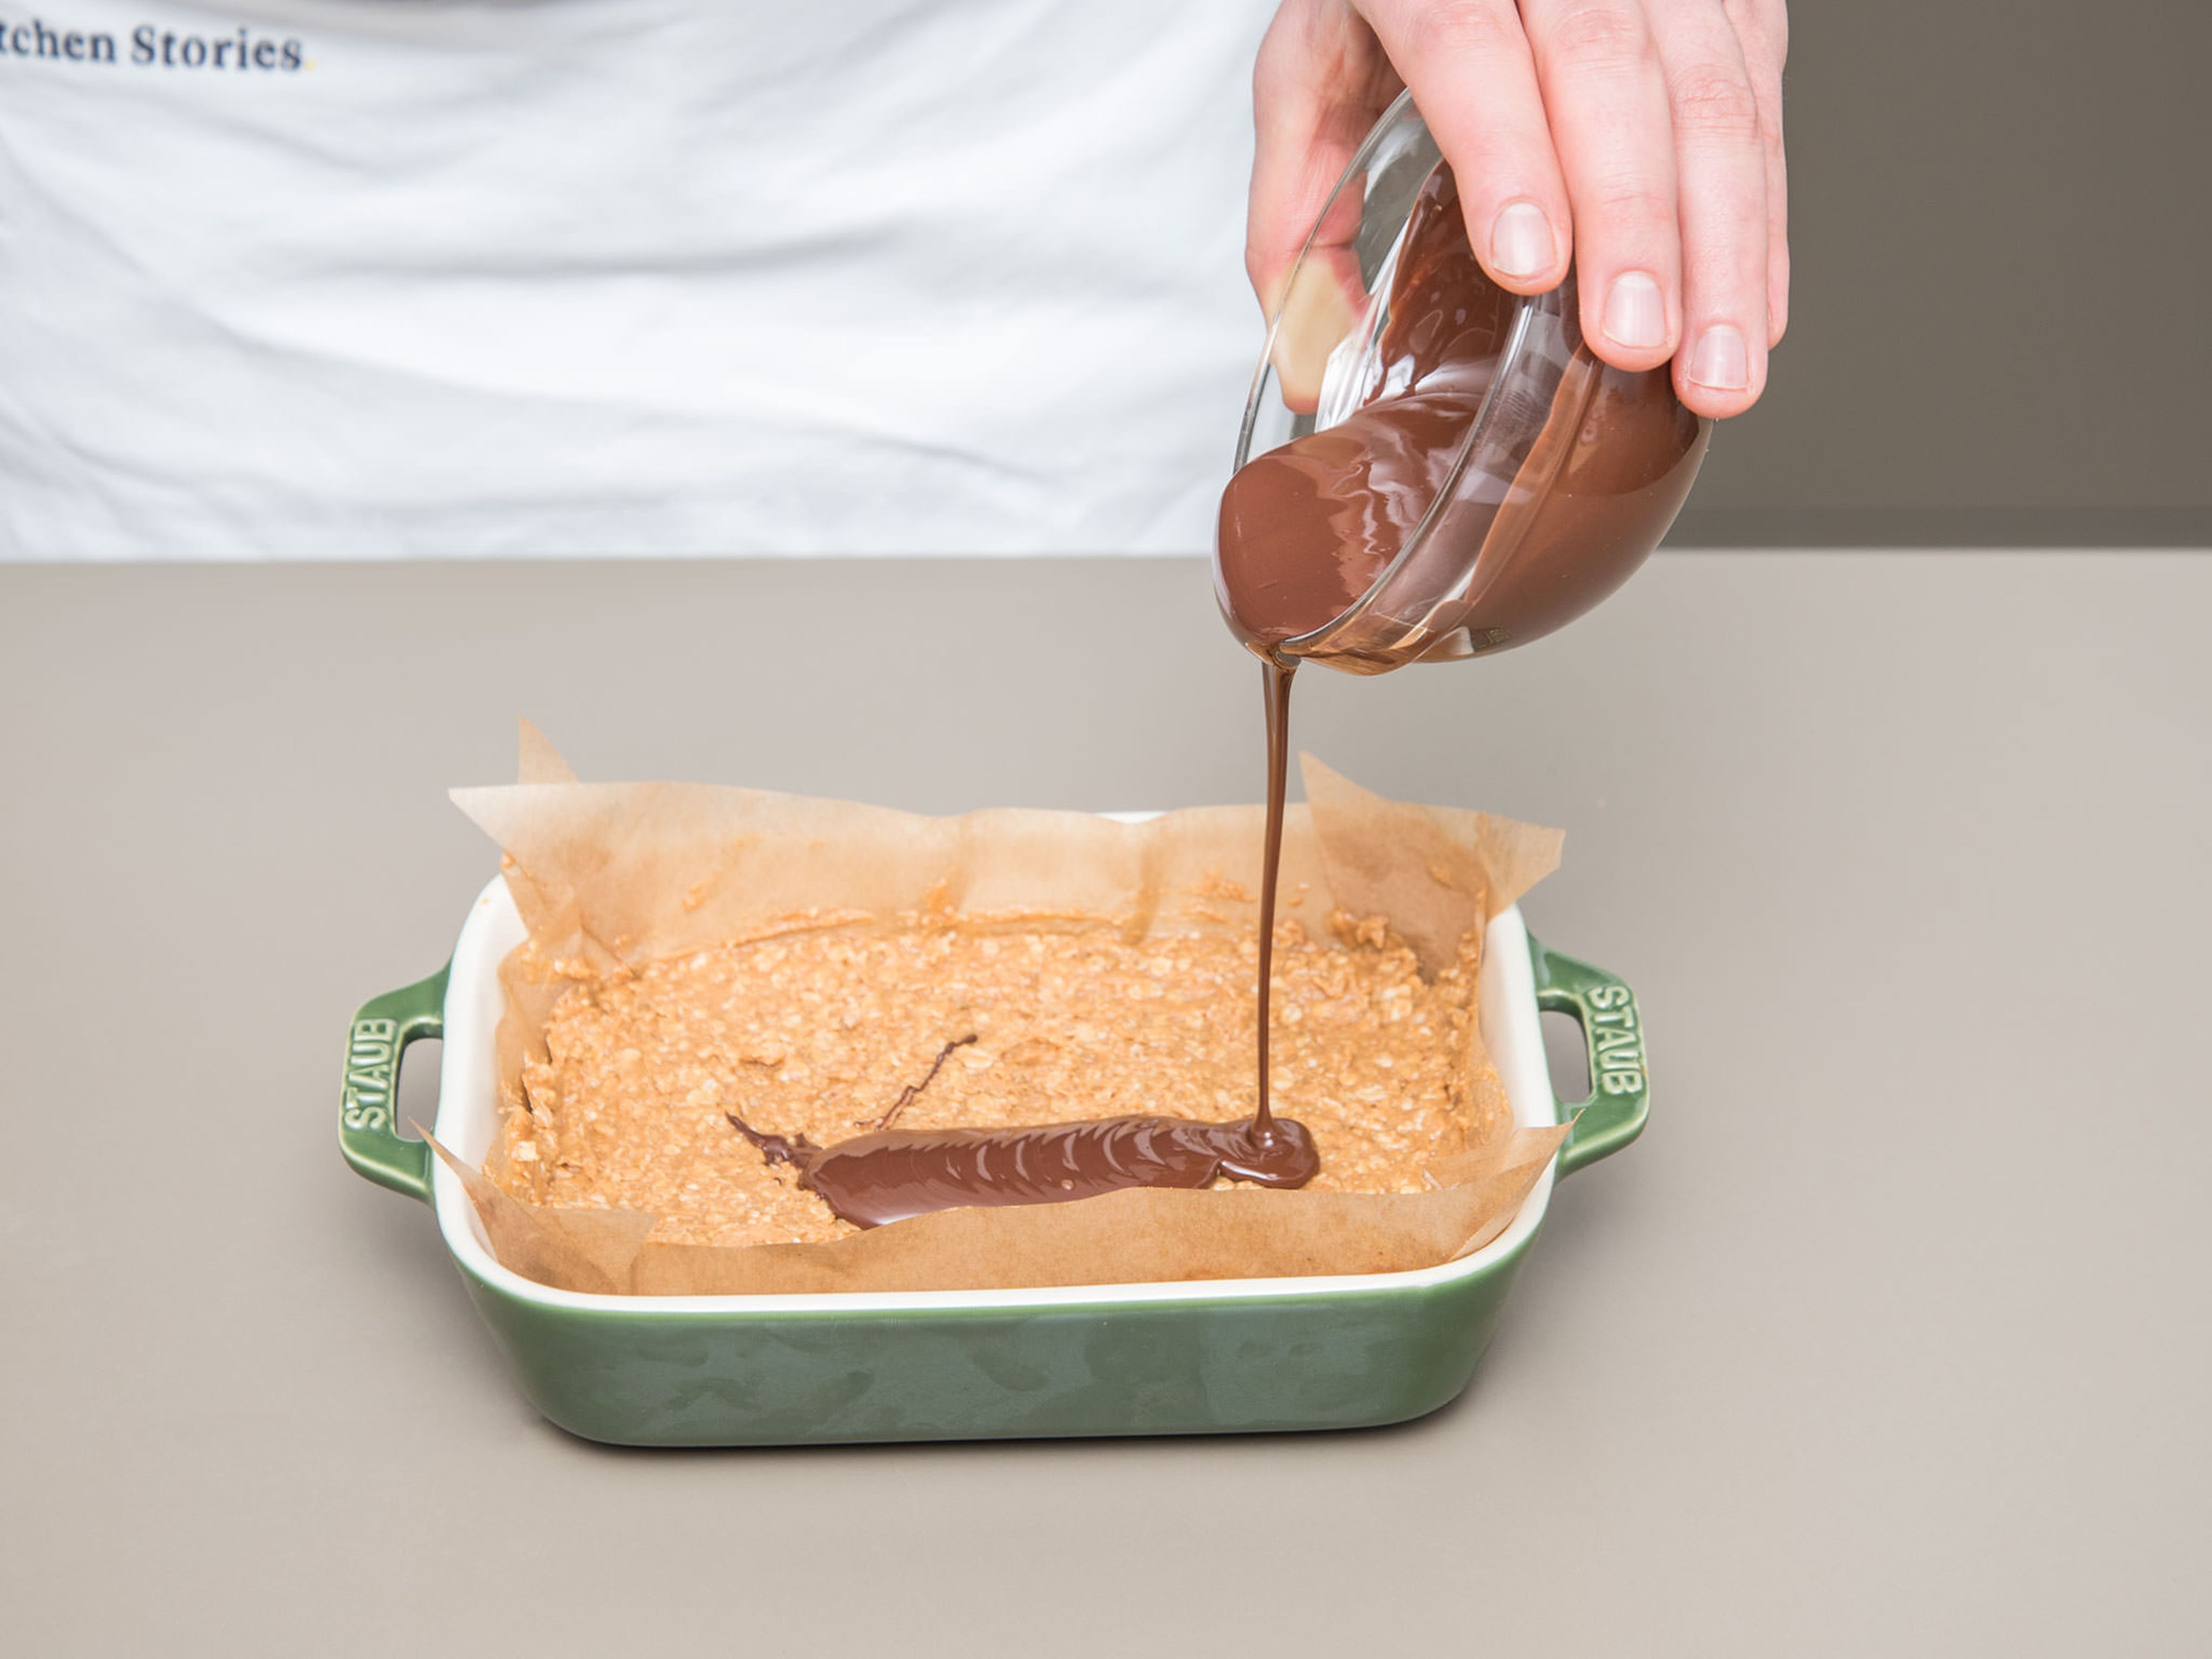 Roughly chop dark chocolate and melt in a heatproof bowl over a pot with simmering water. Pour the chocolate over the cooled peanut butter oat mixture and spread evenly. Freeze for approx. 60 min.